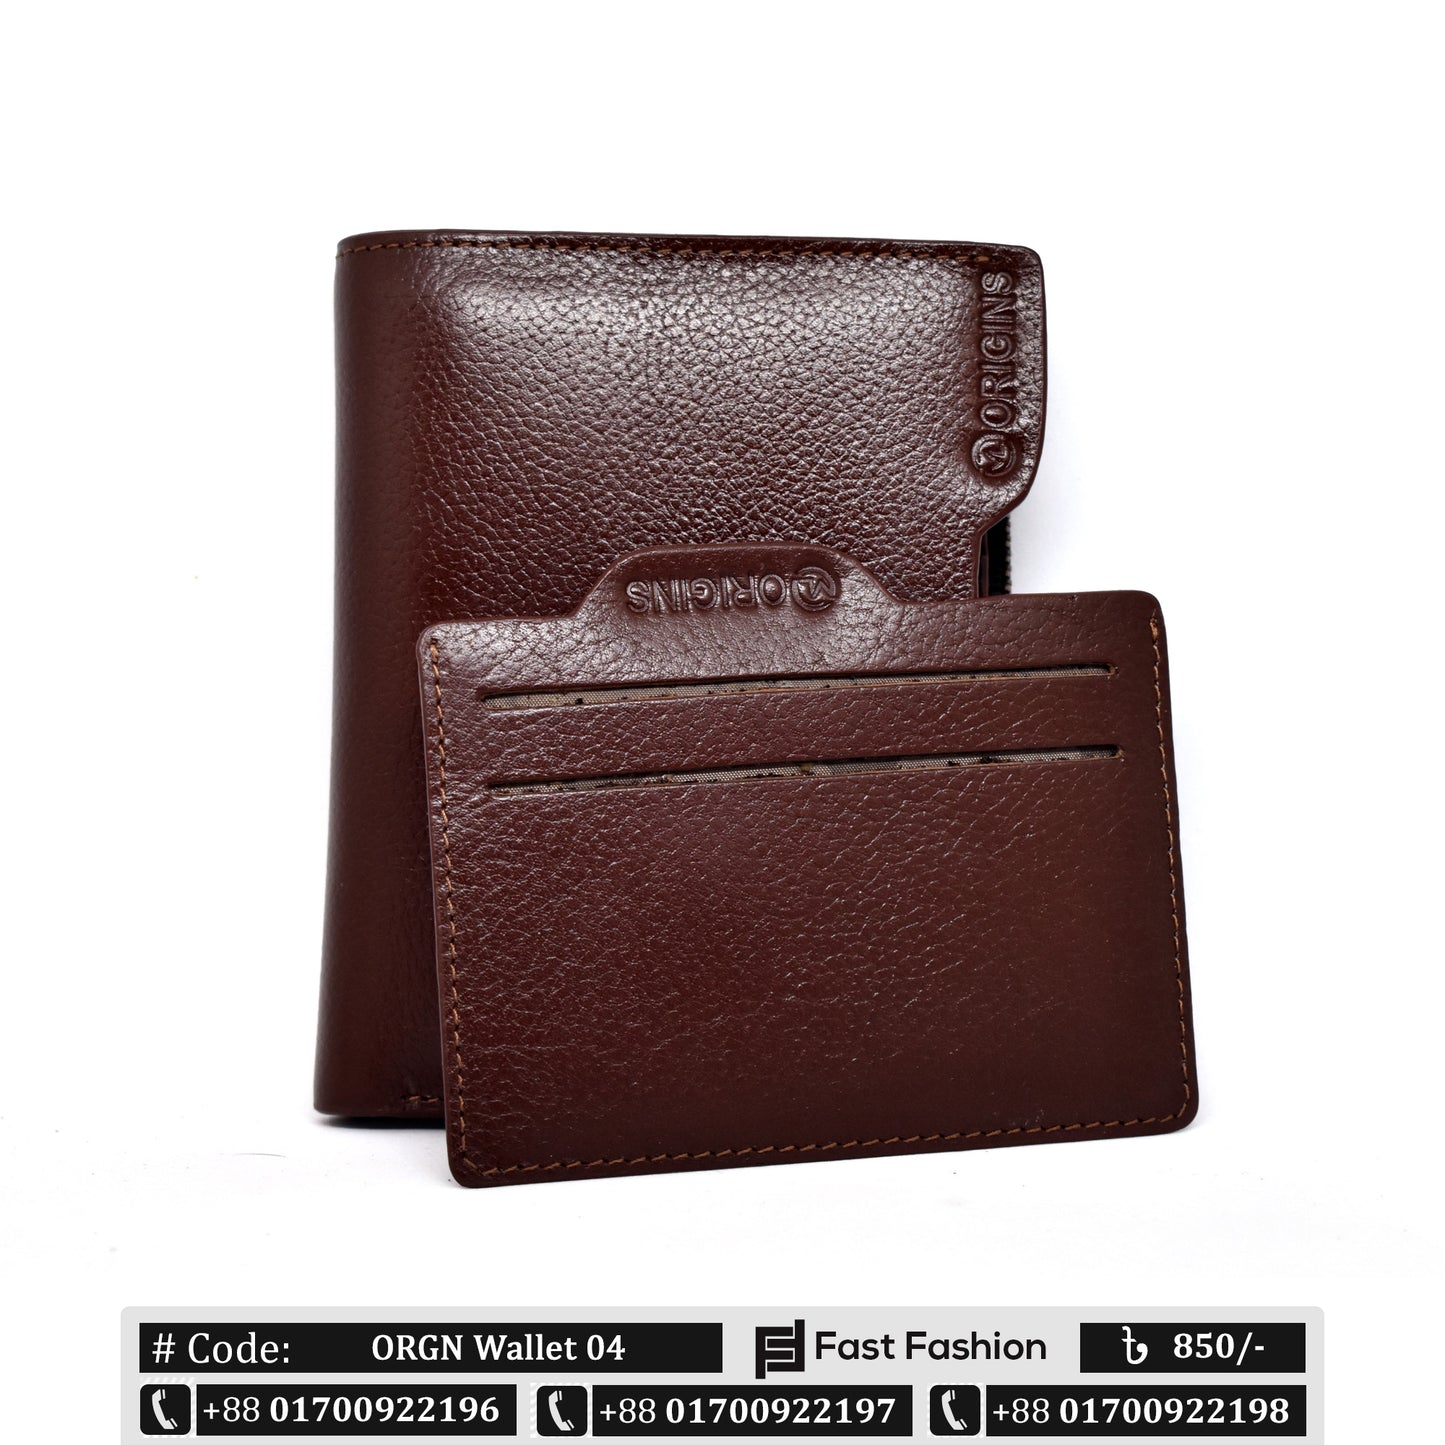 Bogesi Style Pocket Size Premium Quality Leather Wallet for Men | ORGN Wallet 04